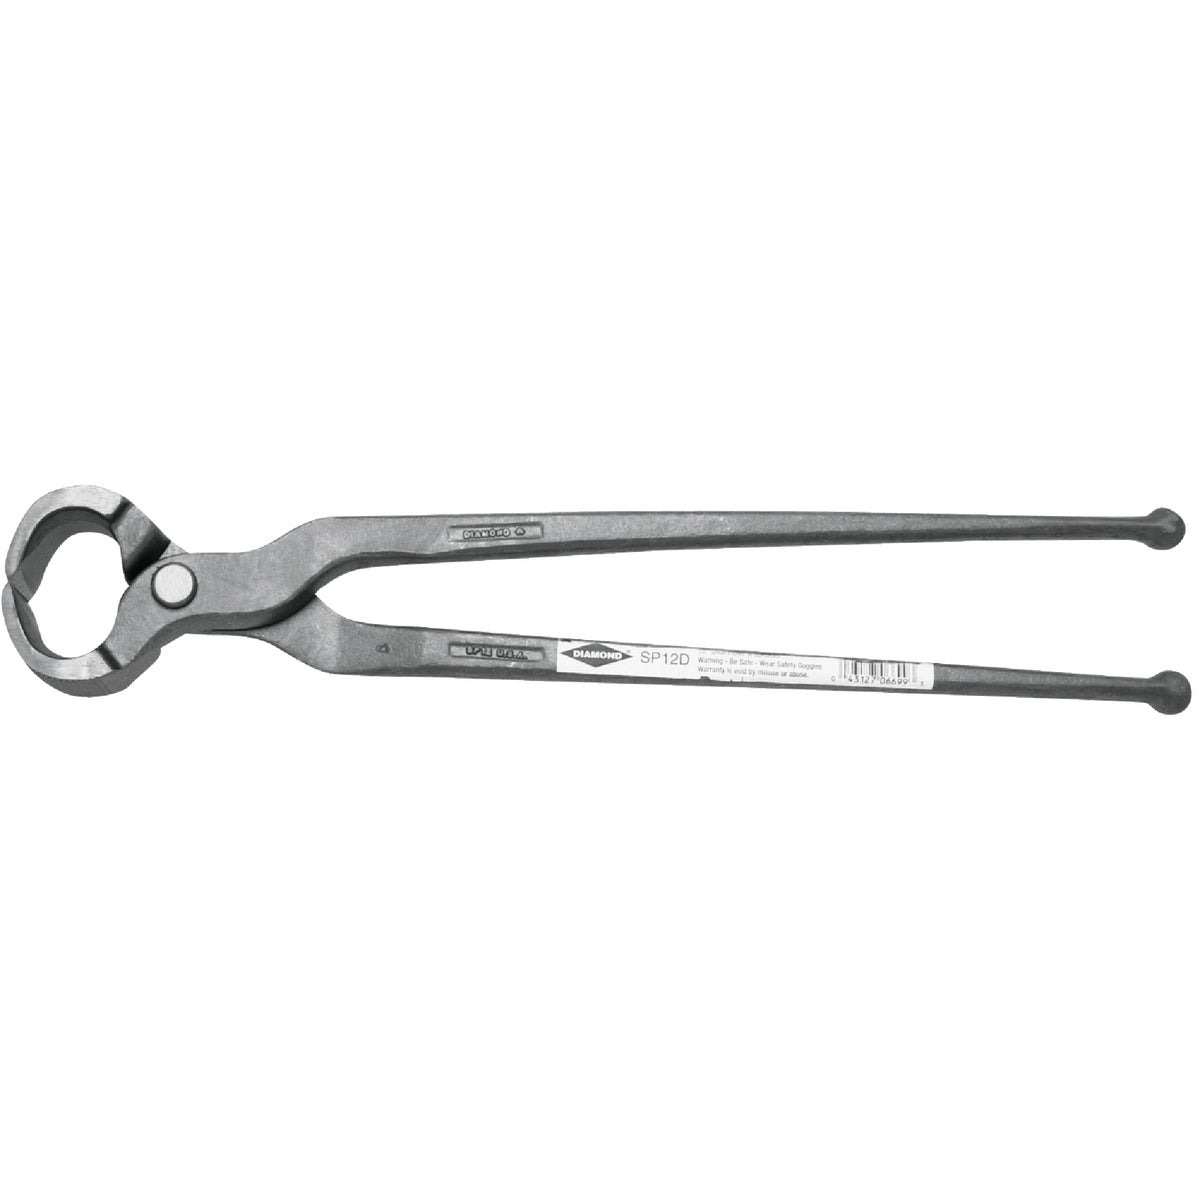 Item 741754, Horseshoe puller &amp; spreader featuring an exclusive pattern with sharp 